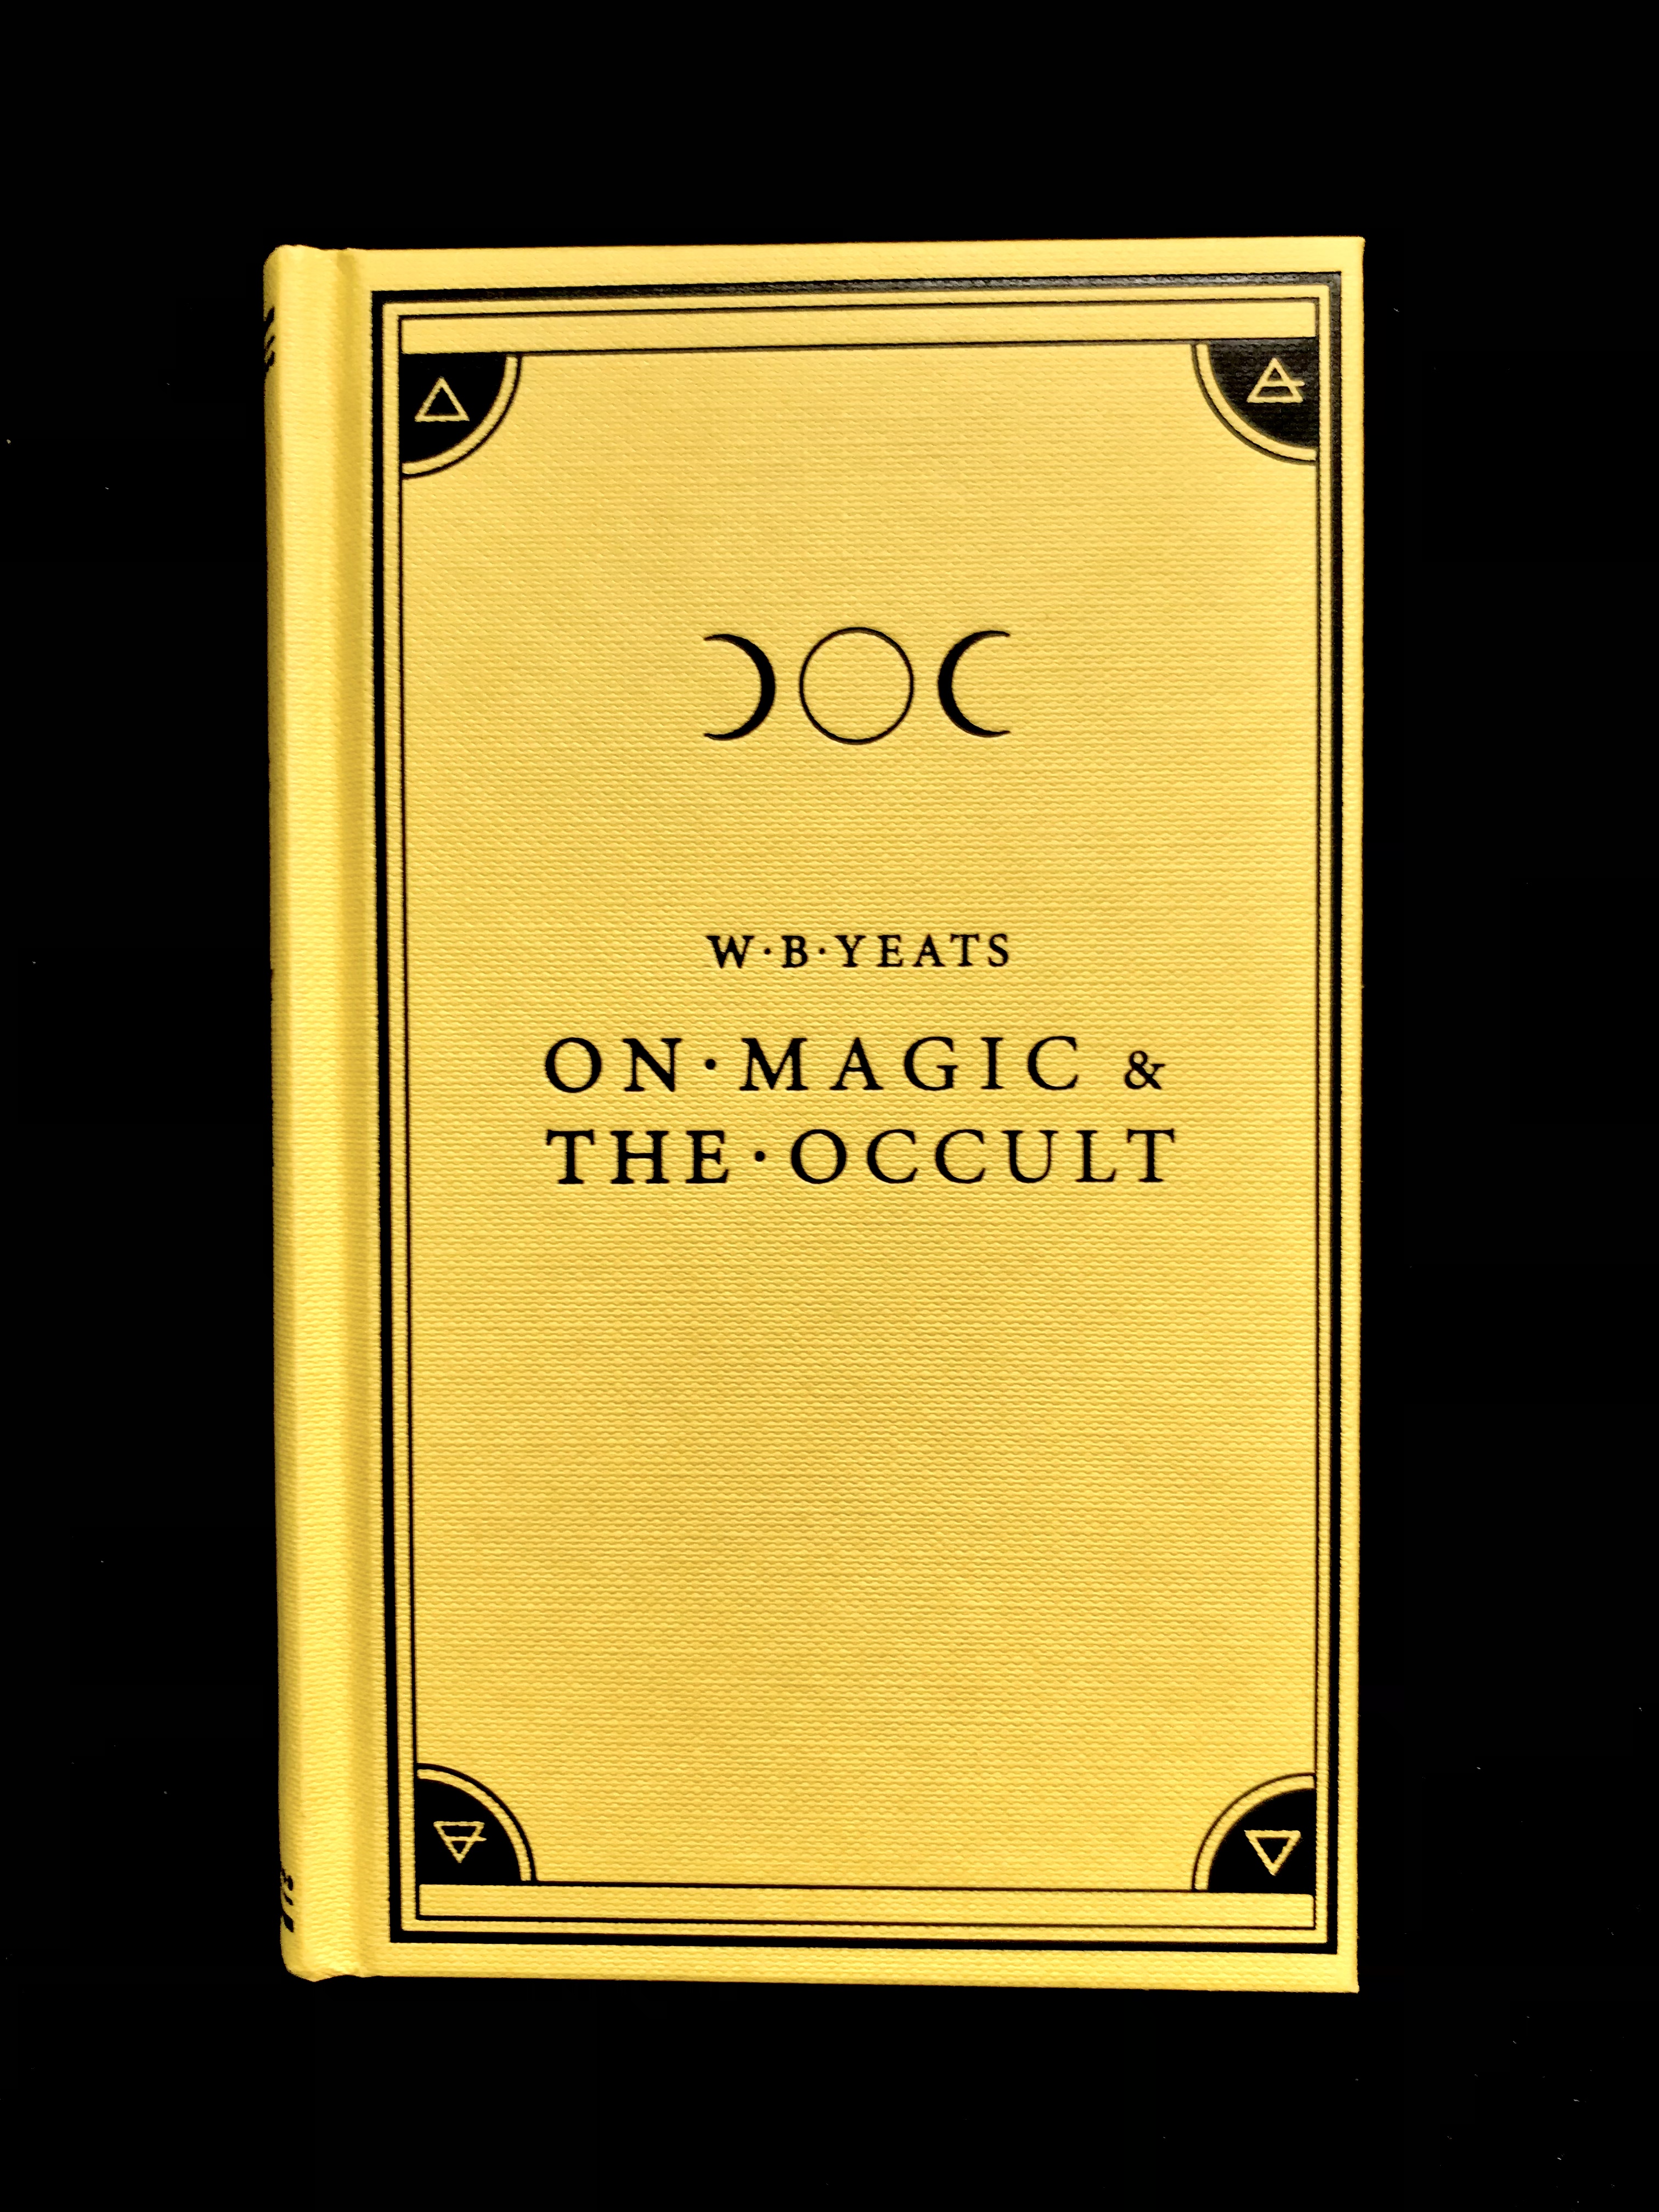 On Magic & The Occult by W. B Yeats